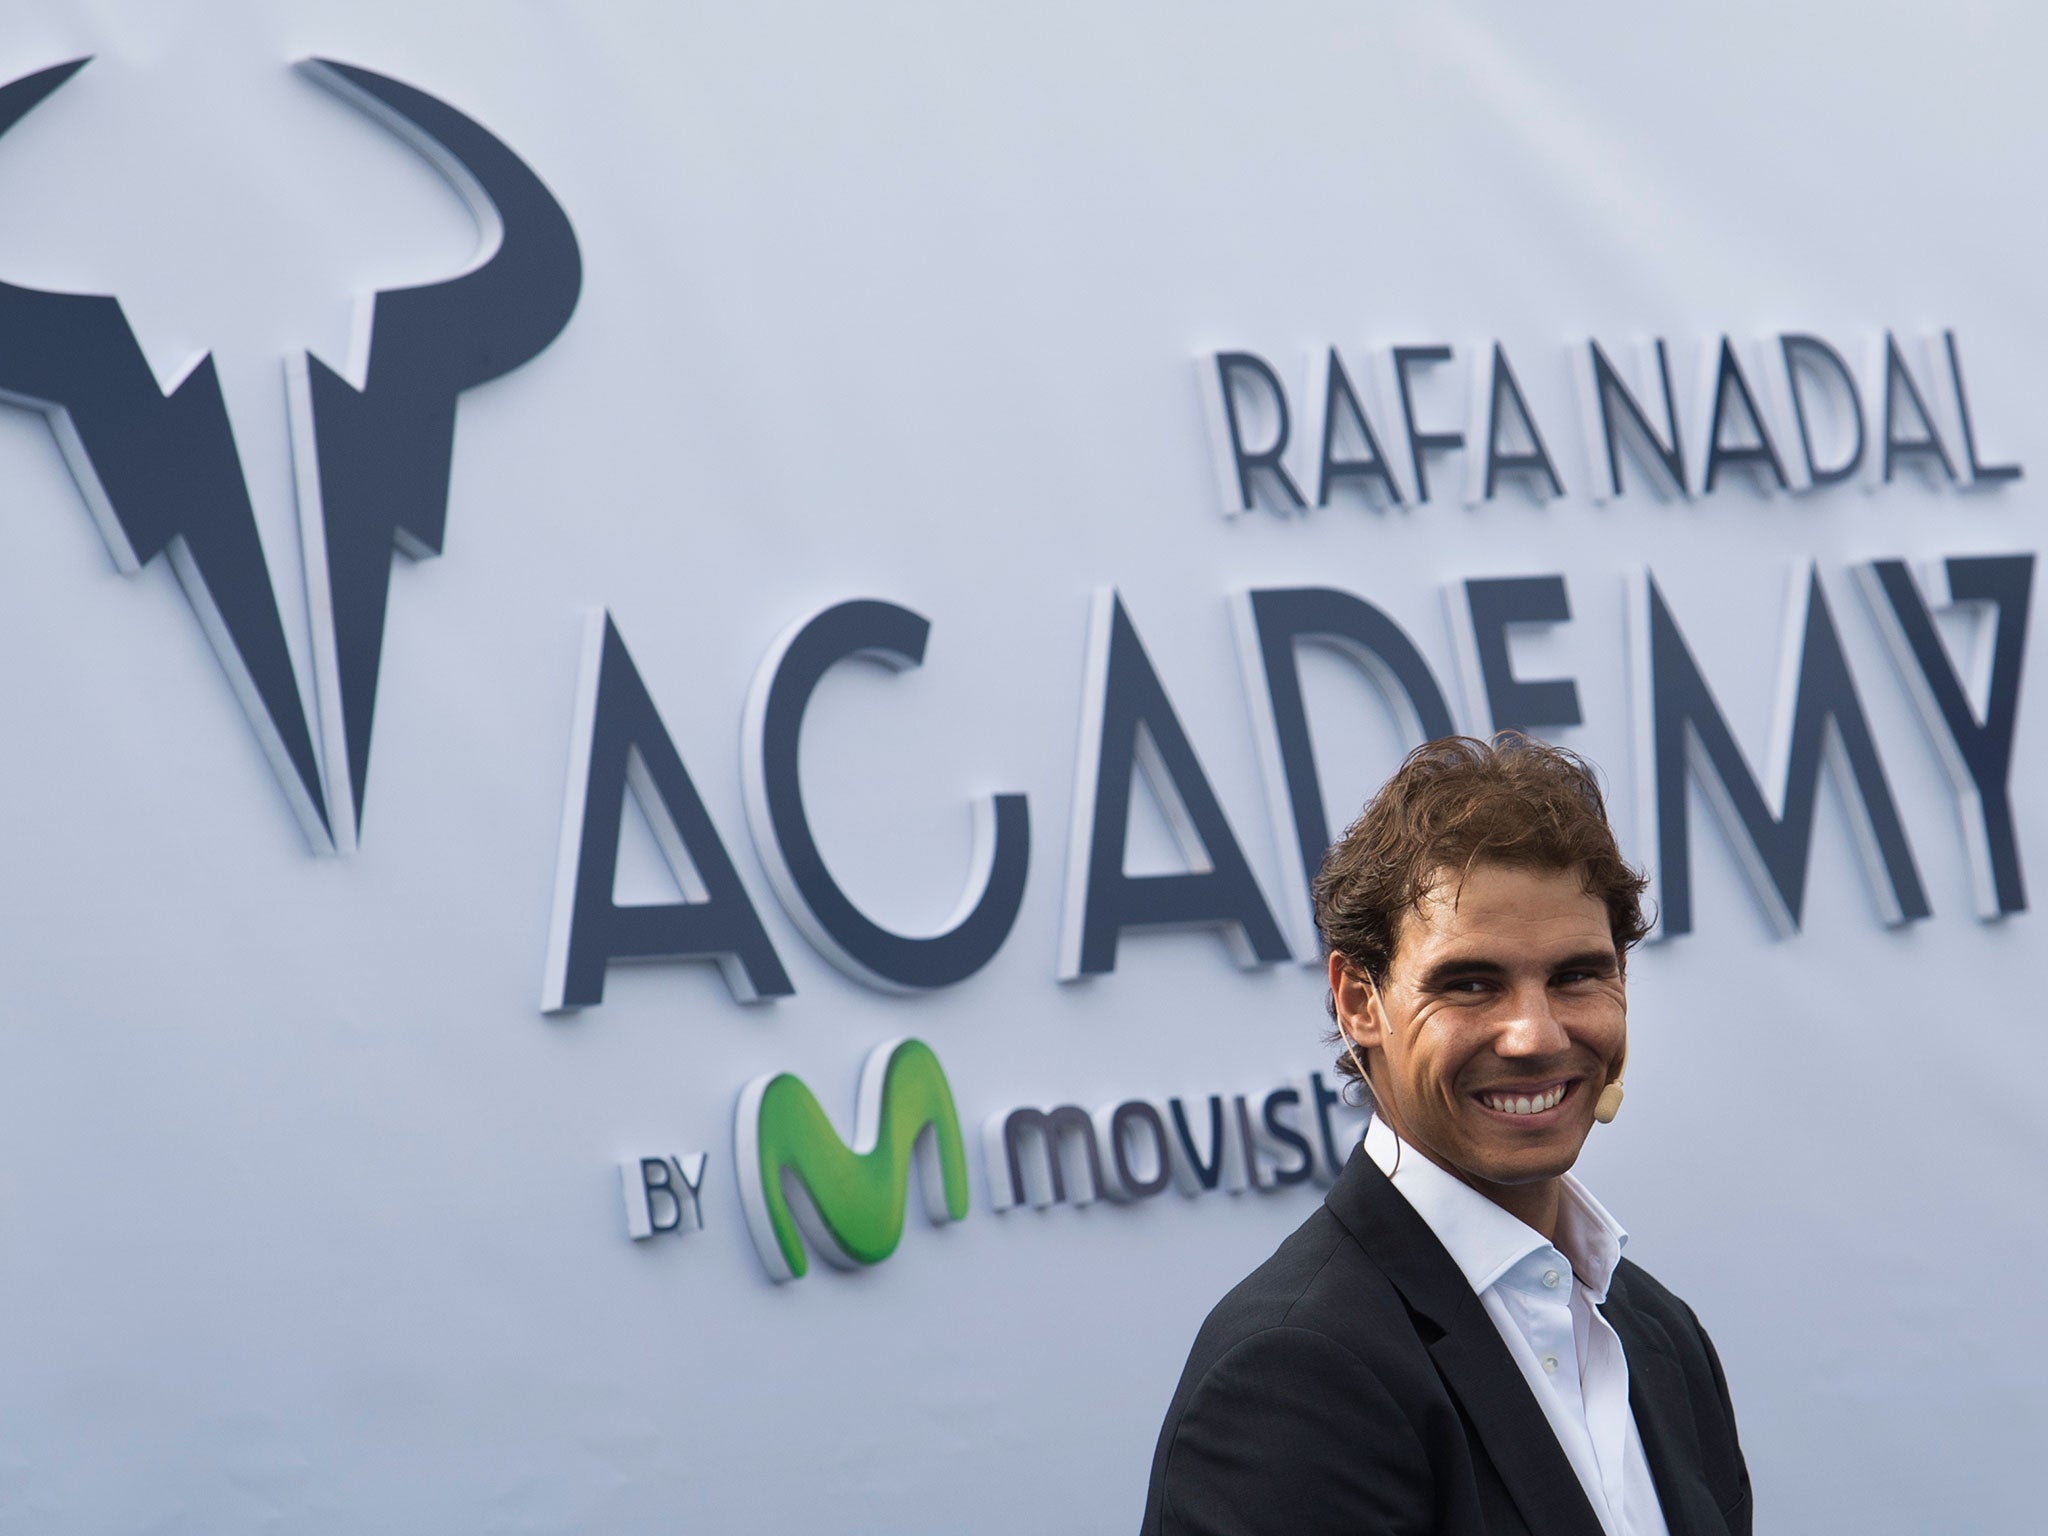 Rafa Nadal at the opening of his new tennis academy on Thursday